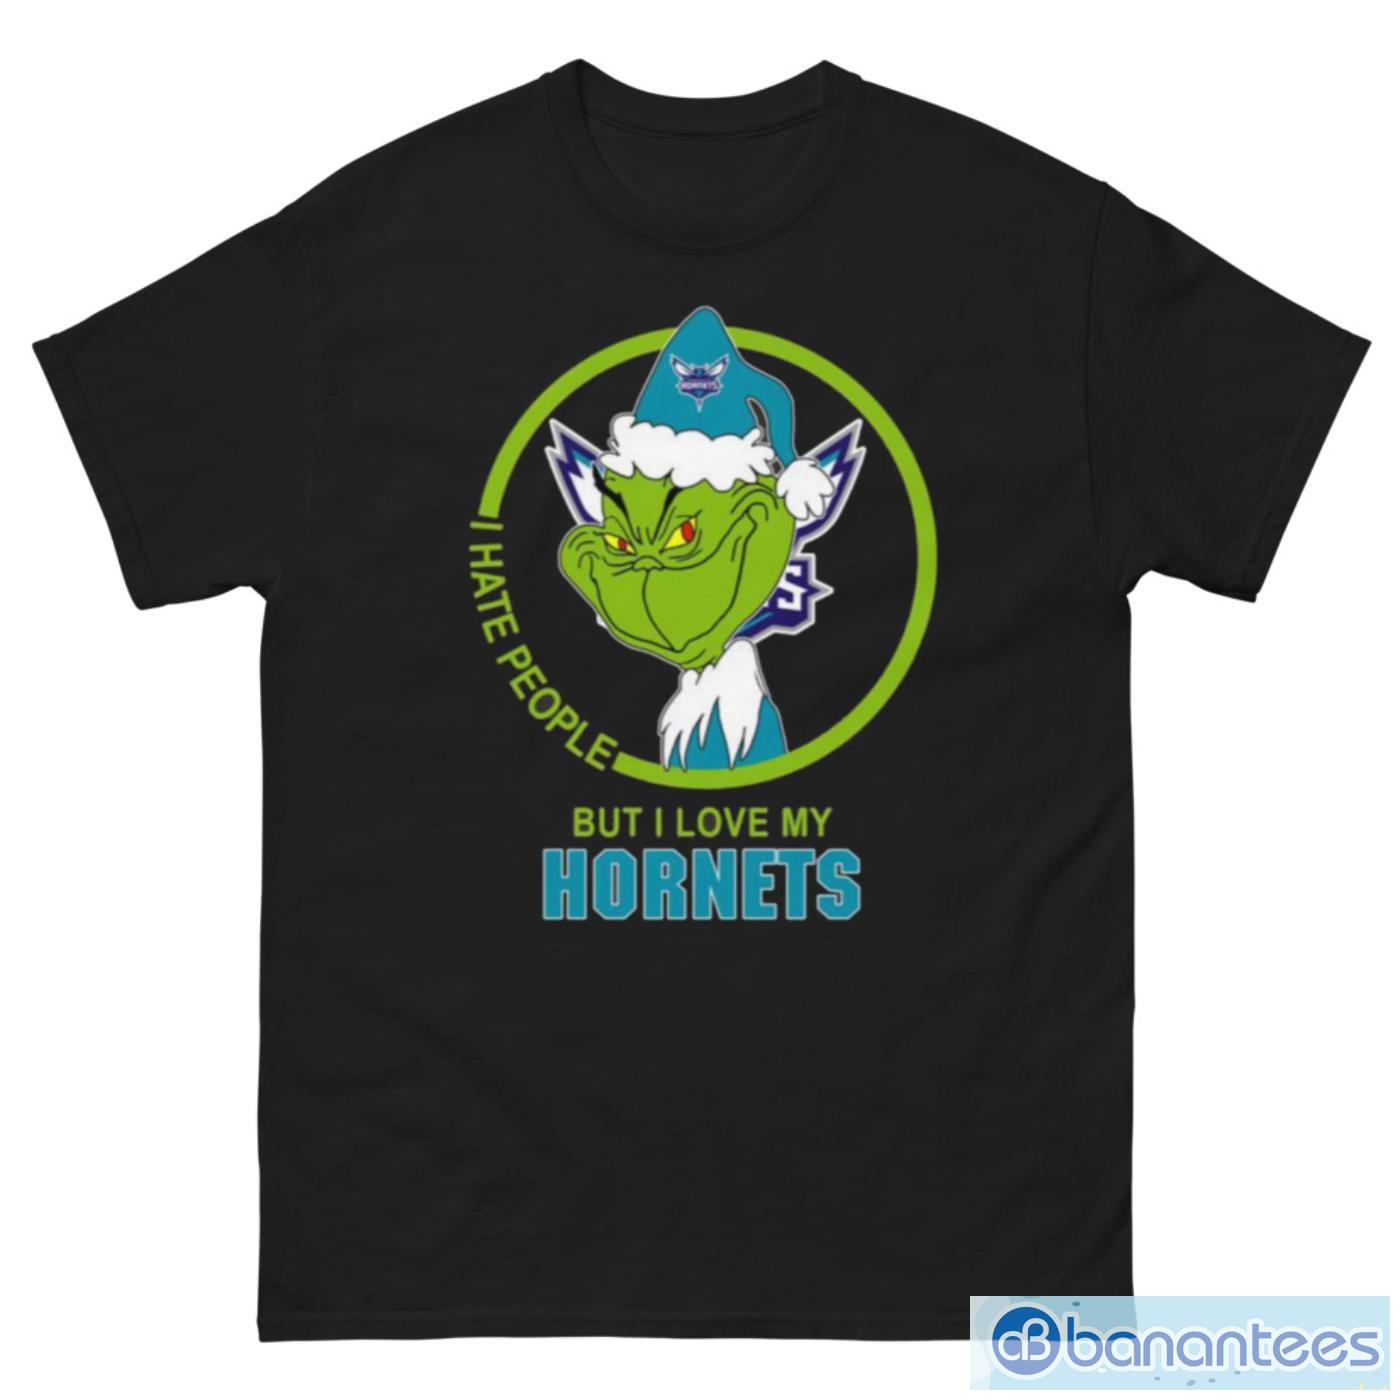 Charlotte Hornets NBA Christmas Grinch I Hate People But I Love My Favorite Basketball Team T Shirt - G500 Men’s Classic Tee